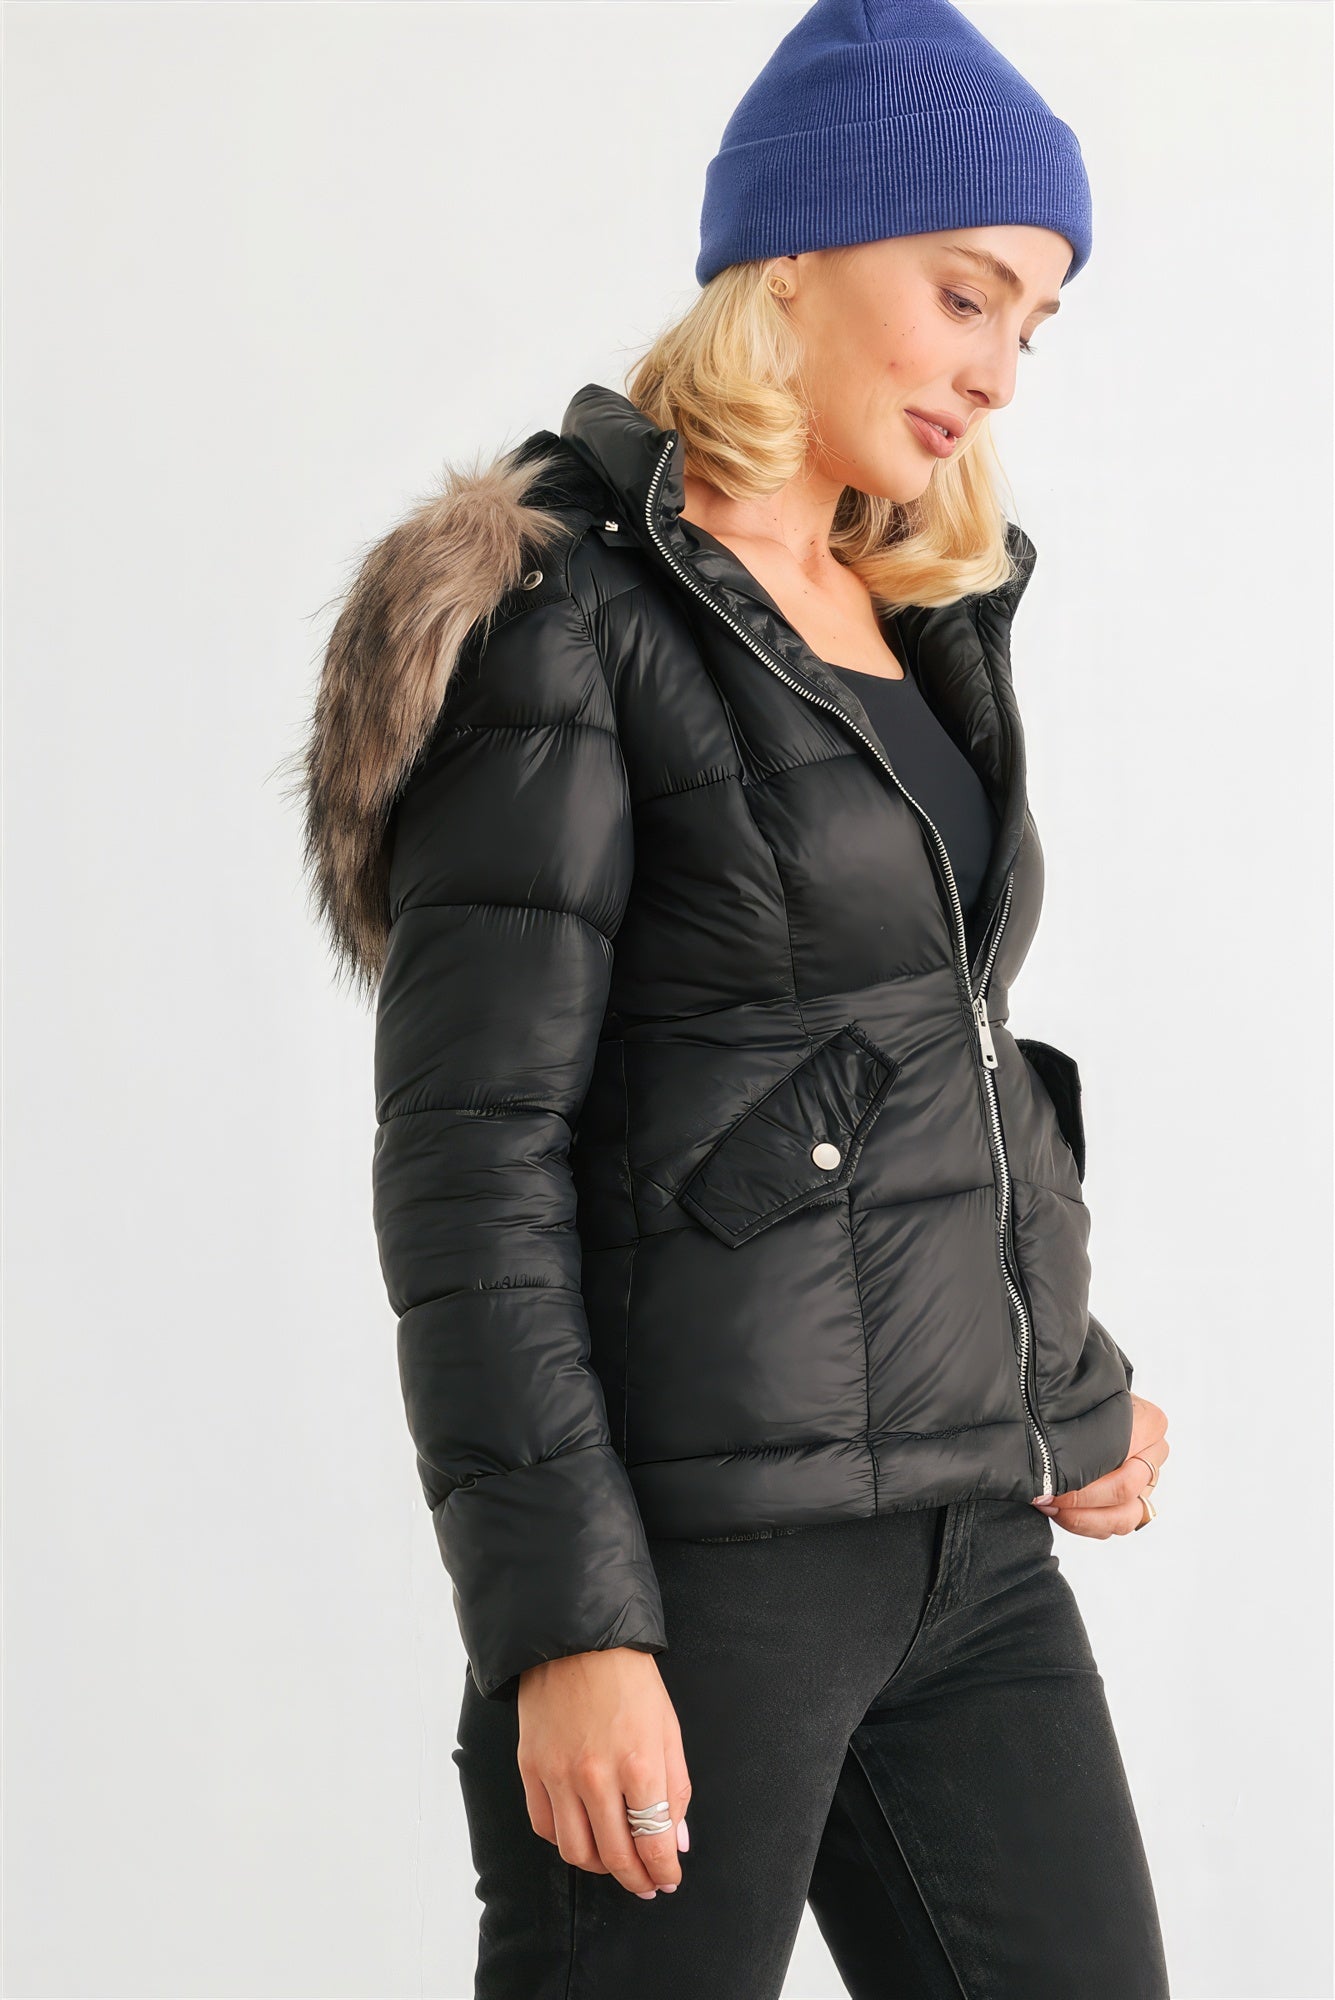 THE LUCIA Long Sleeve Faux Fur Hood Padded Water Resistant Finish Jacket